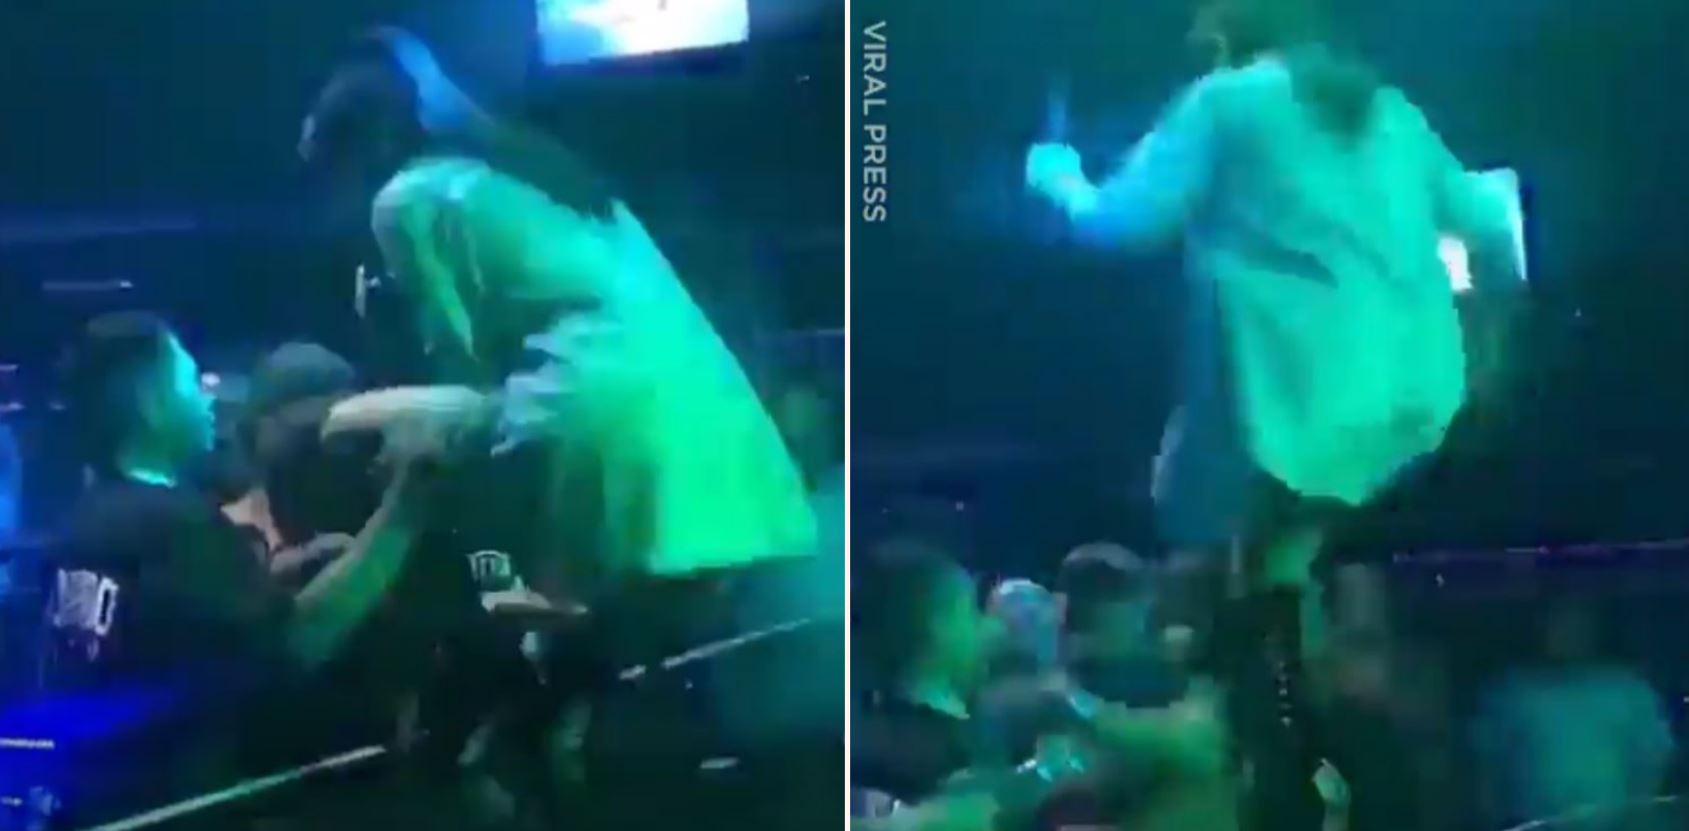 Singer Soccer Kicks A Guy In Head After He Tries To Grope Her Onstage